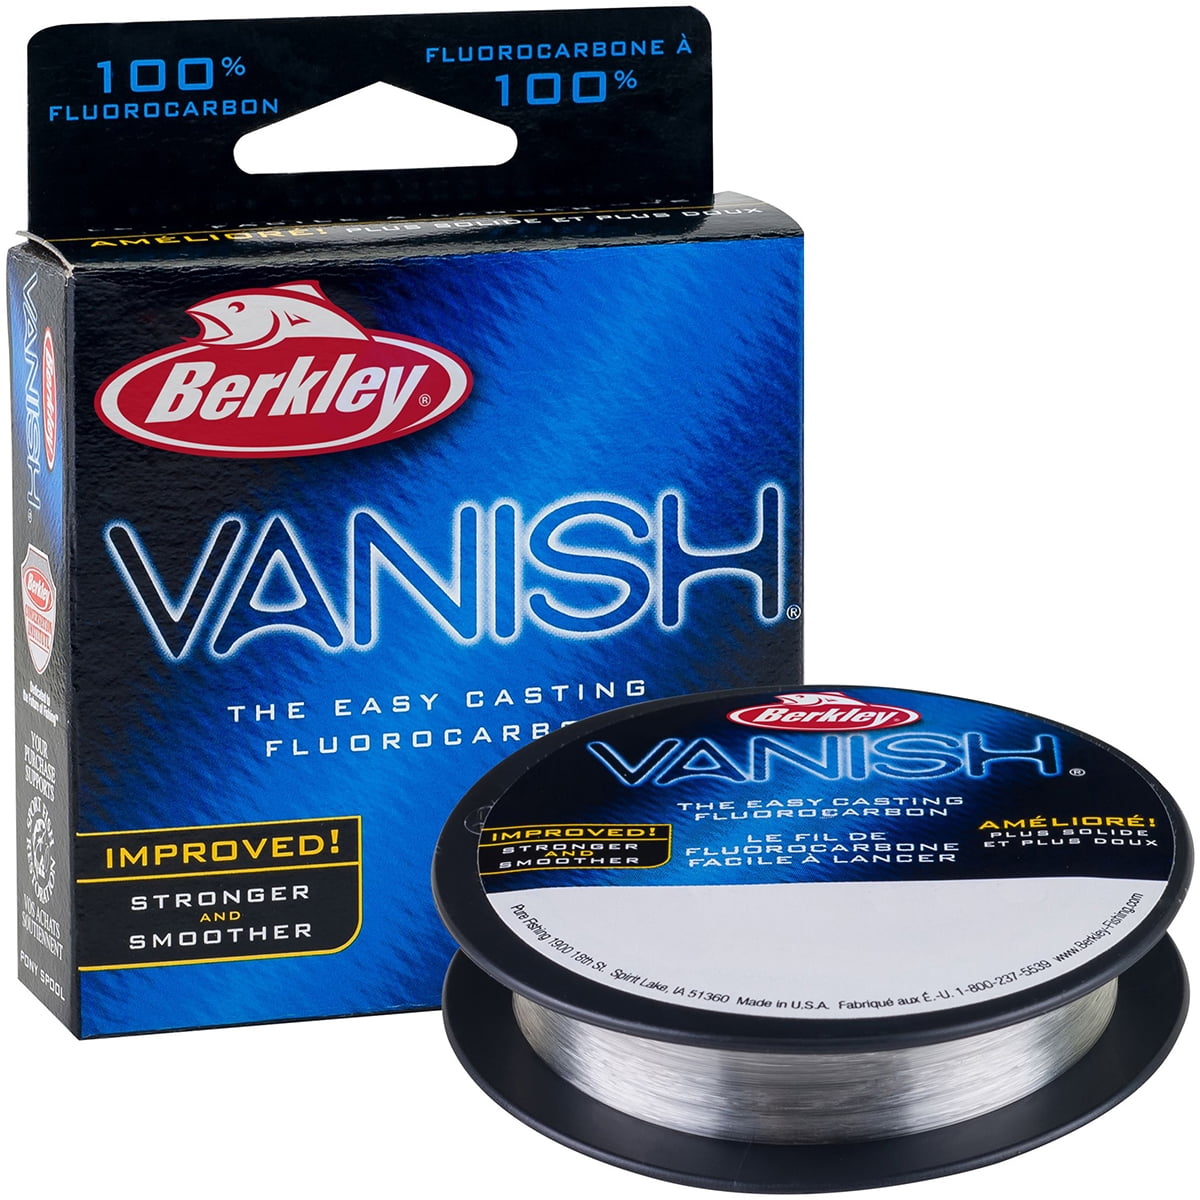 Best Fluorocarbon Fishing Lines In 2023 - Top 10 Fluorocarbon